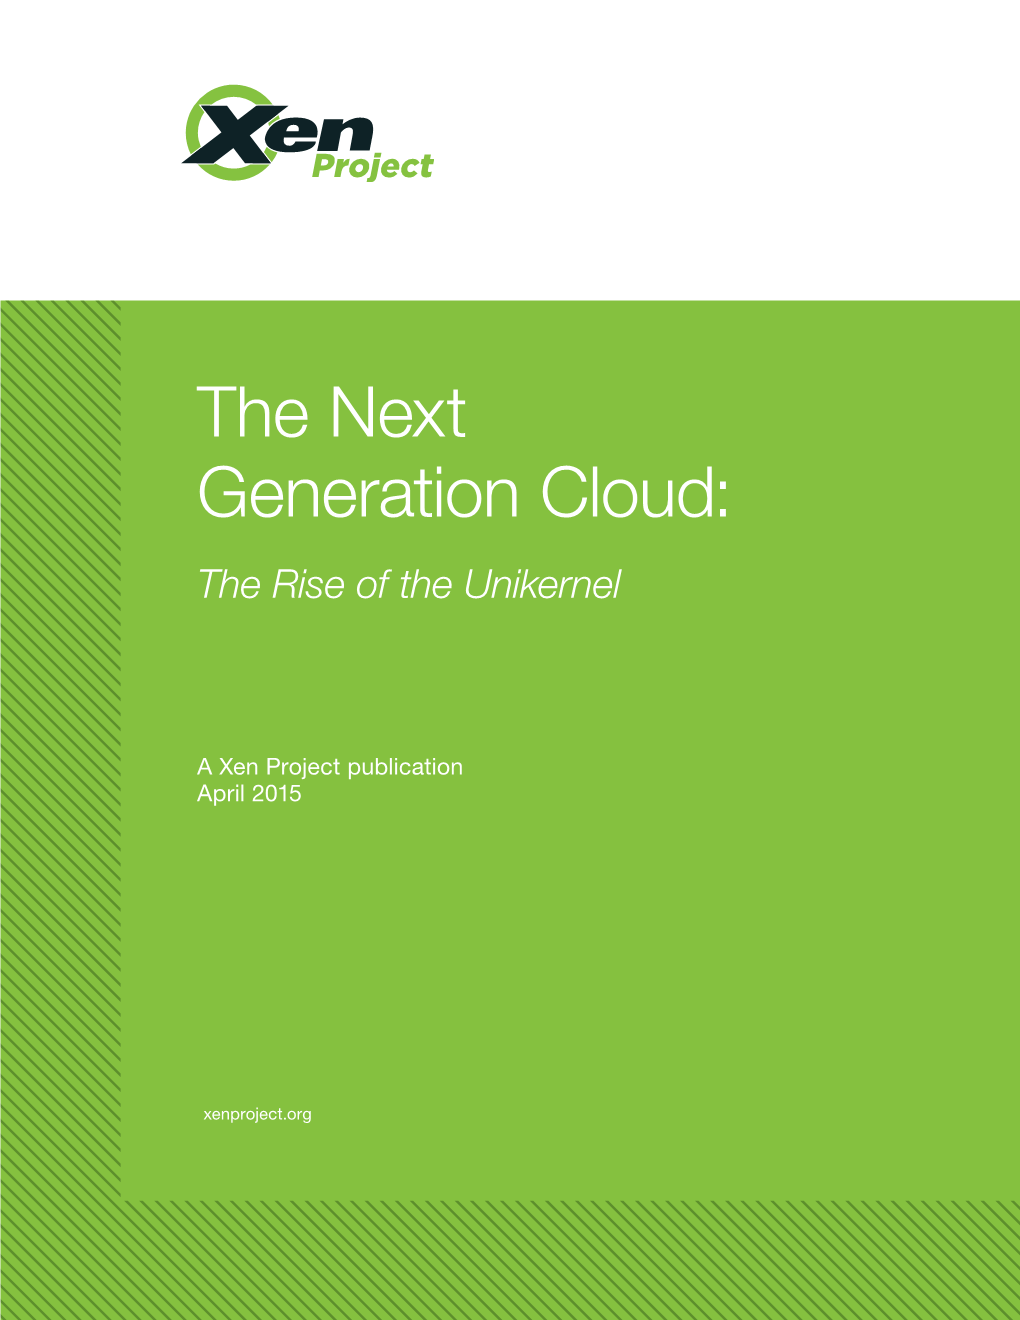 The Next Generation Cloud: the Rise of the Unikernel